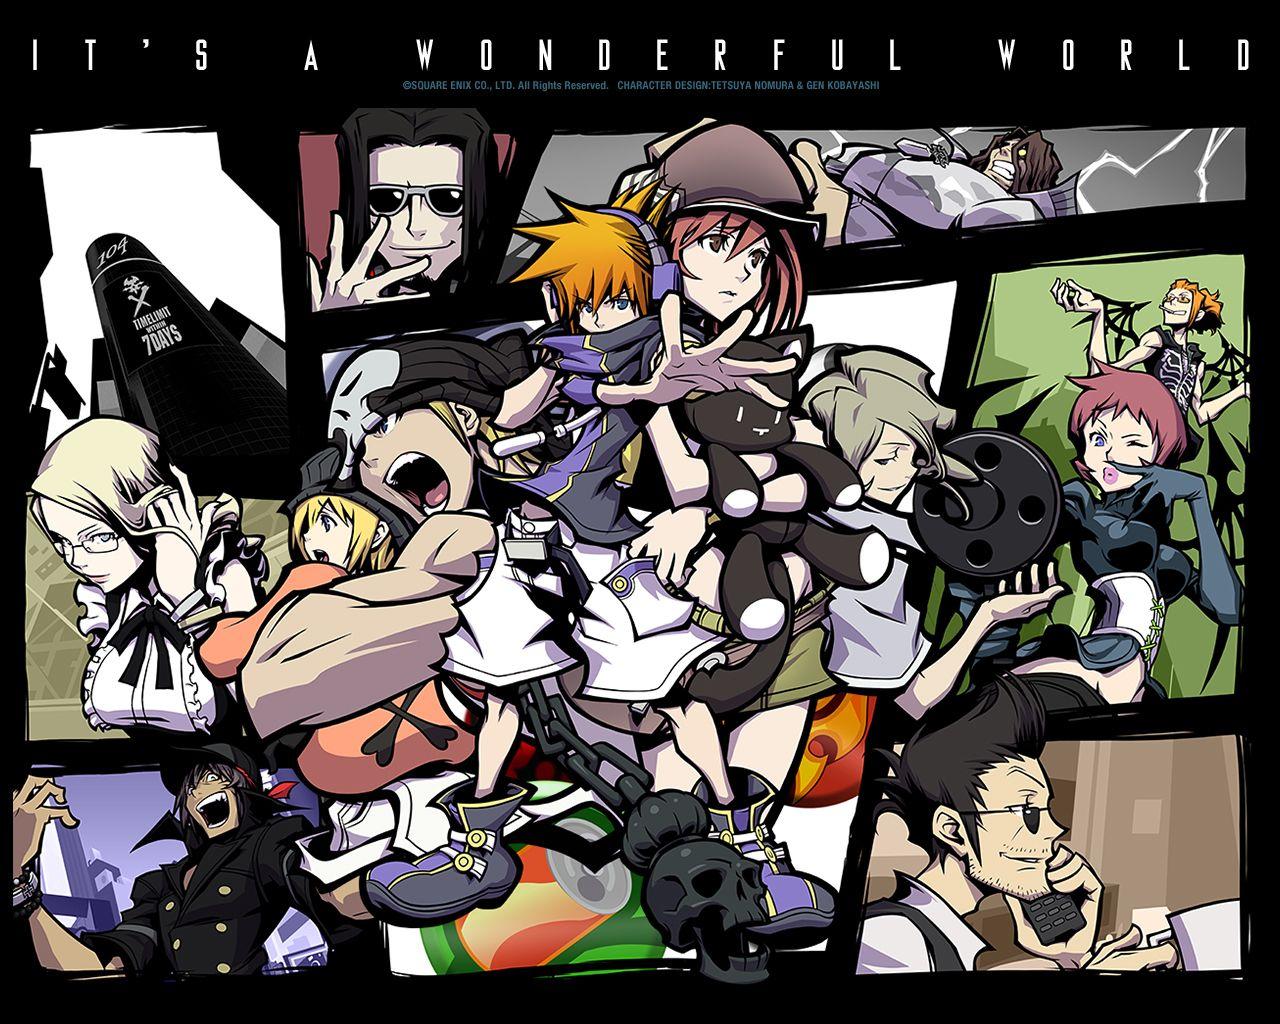 The World Ends With You Wallpaper and Background Imagex1024